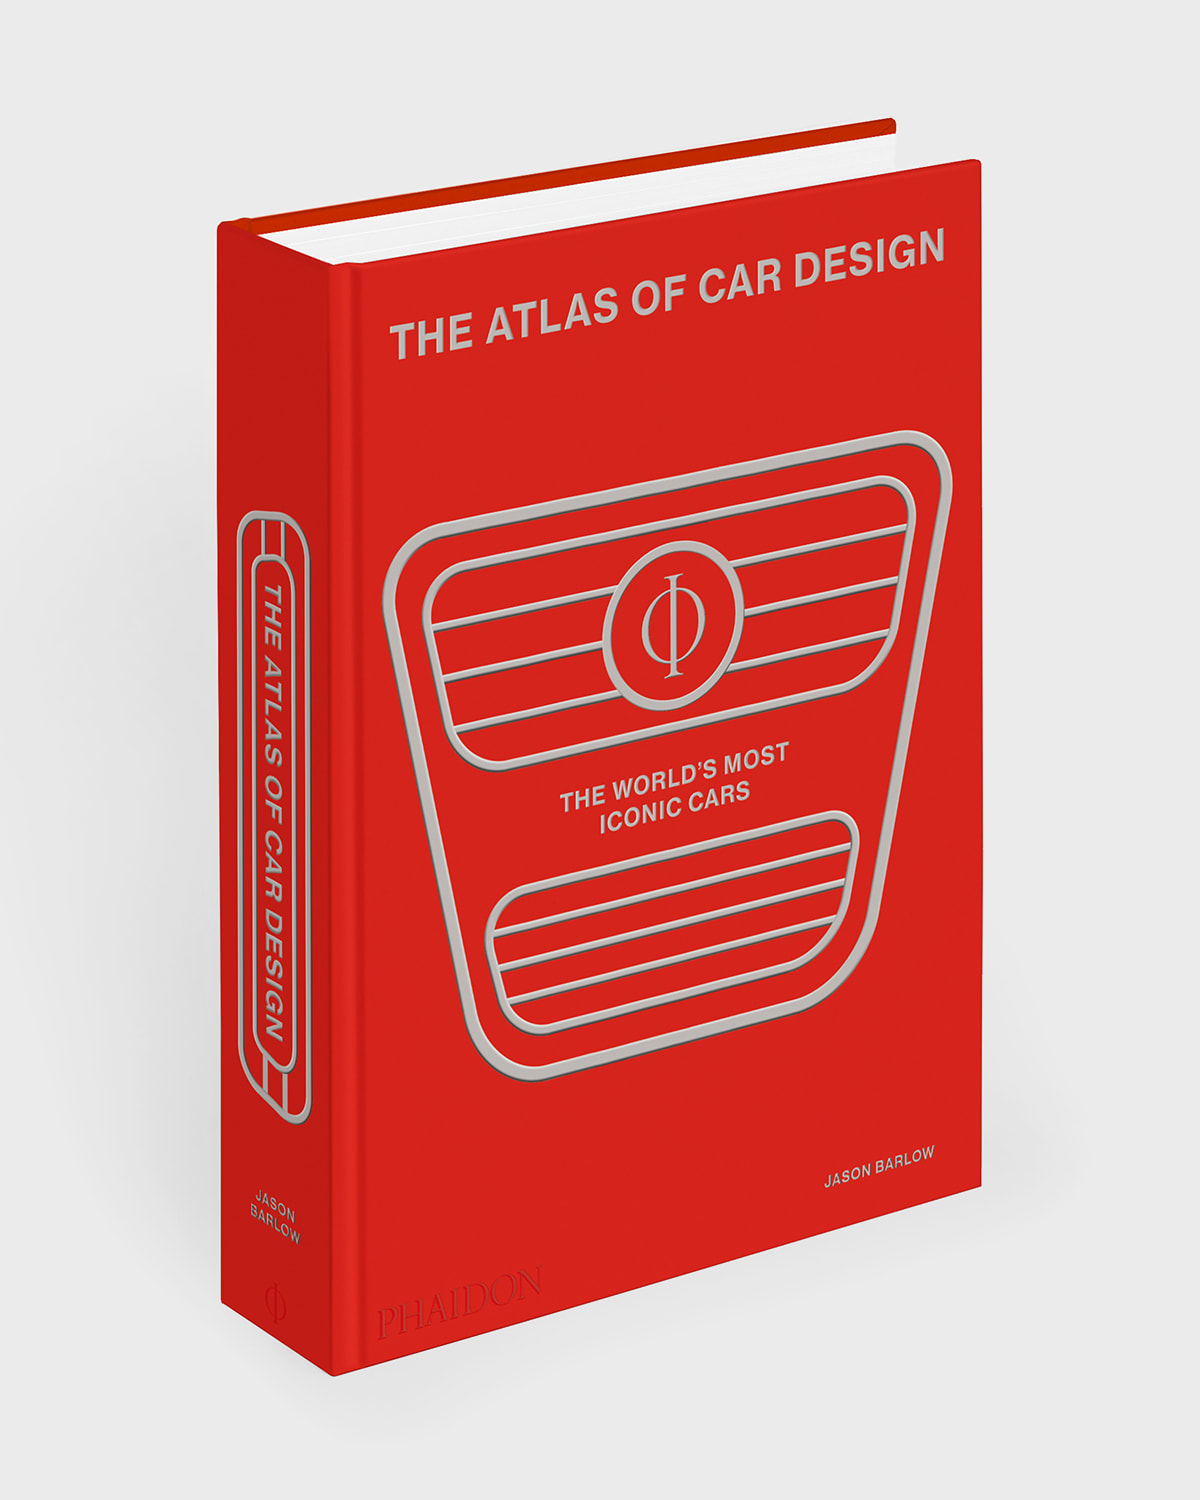 "The Atlas of Car Design (Red Edition)" Book by Jason Barlow, with Guy Bird and Brett Berk